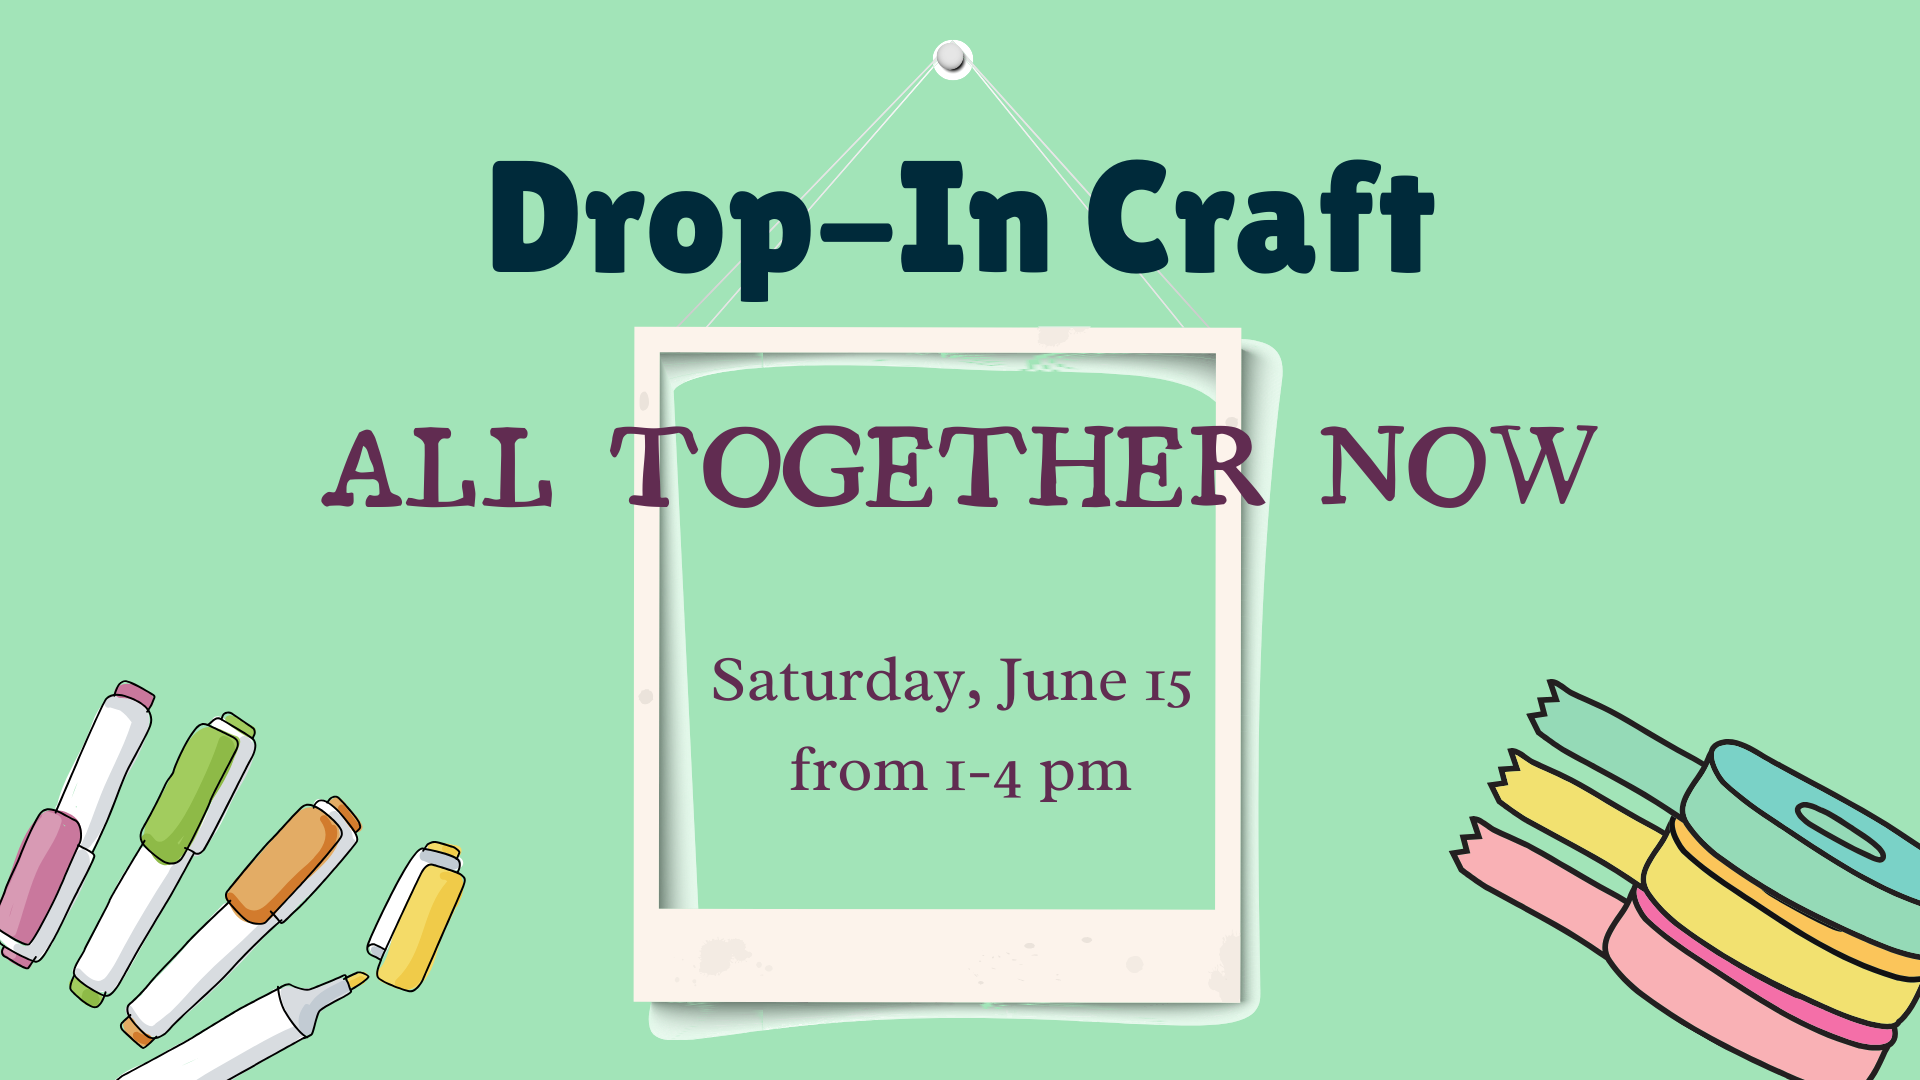 All Together Now Drop-In Craft